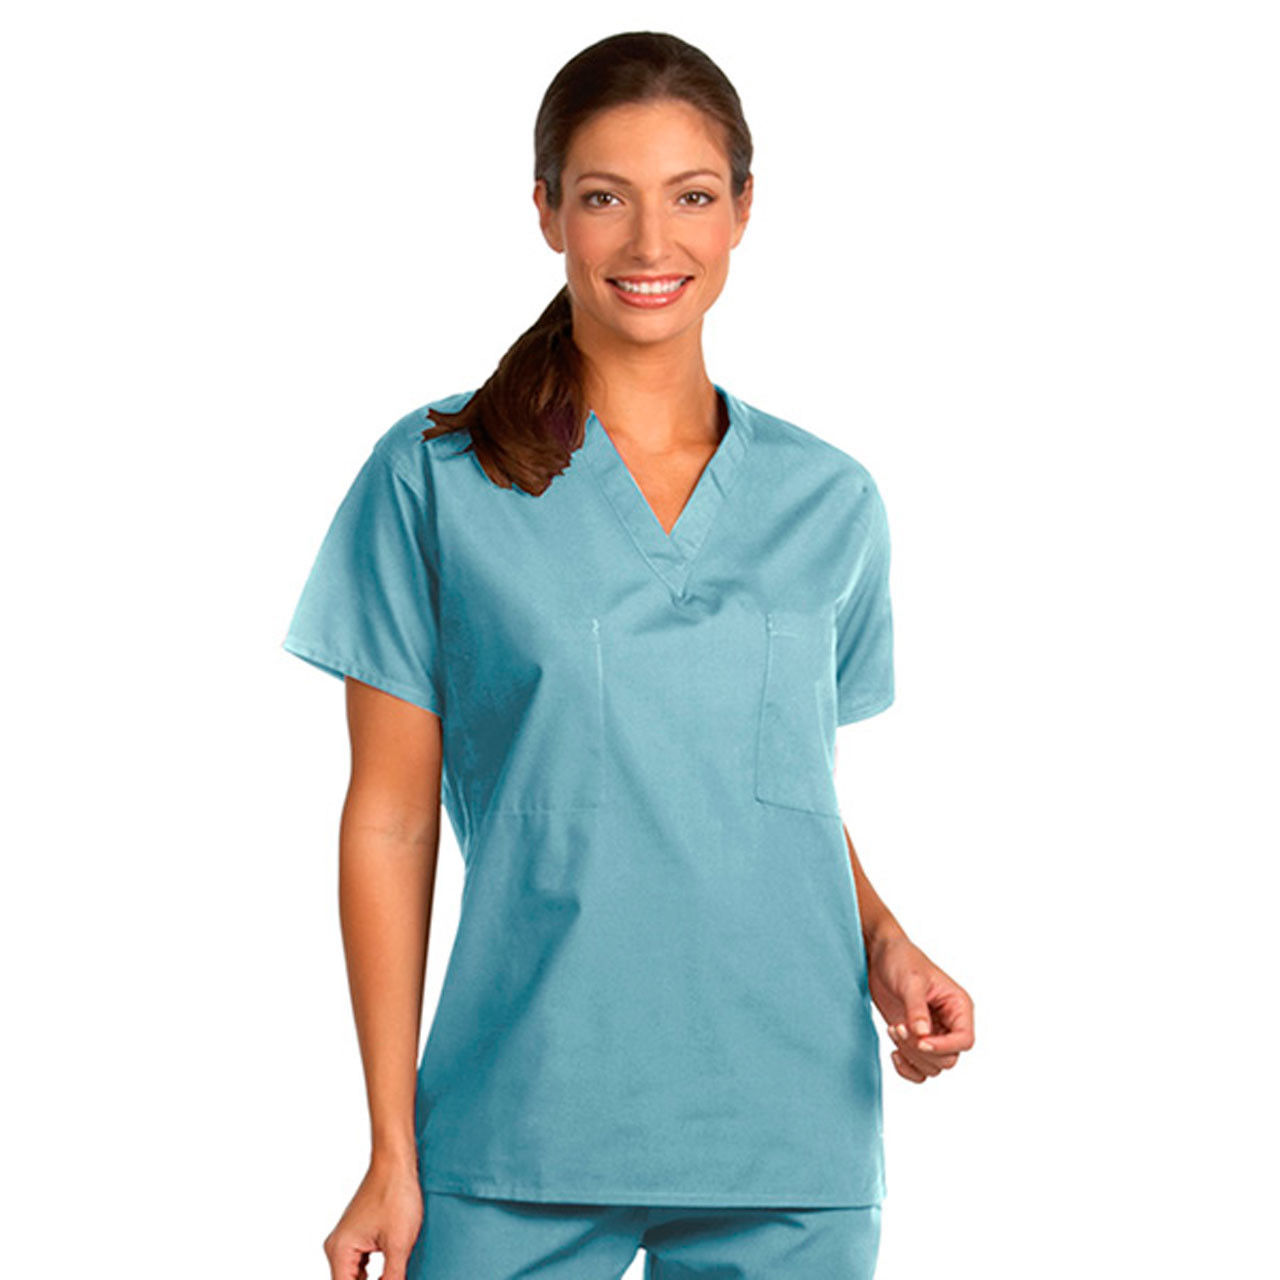 Why are surgical scrubs green?